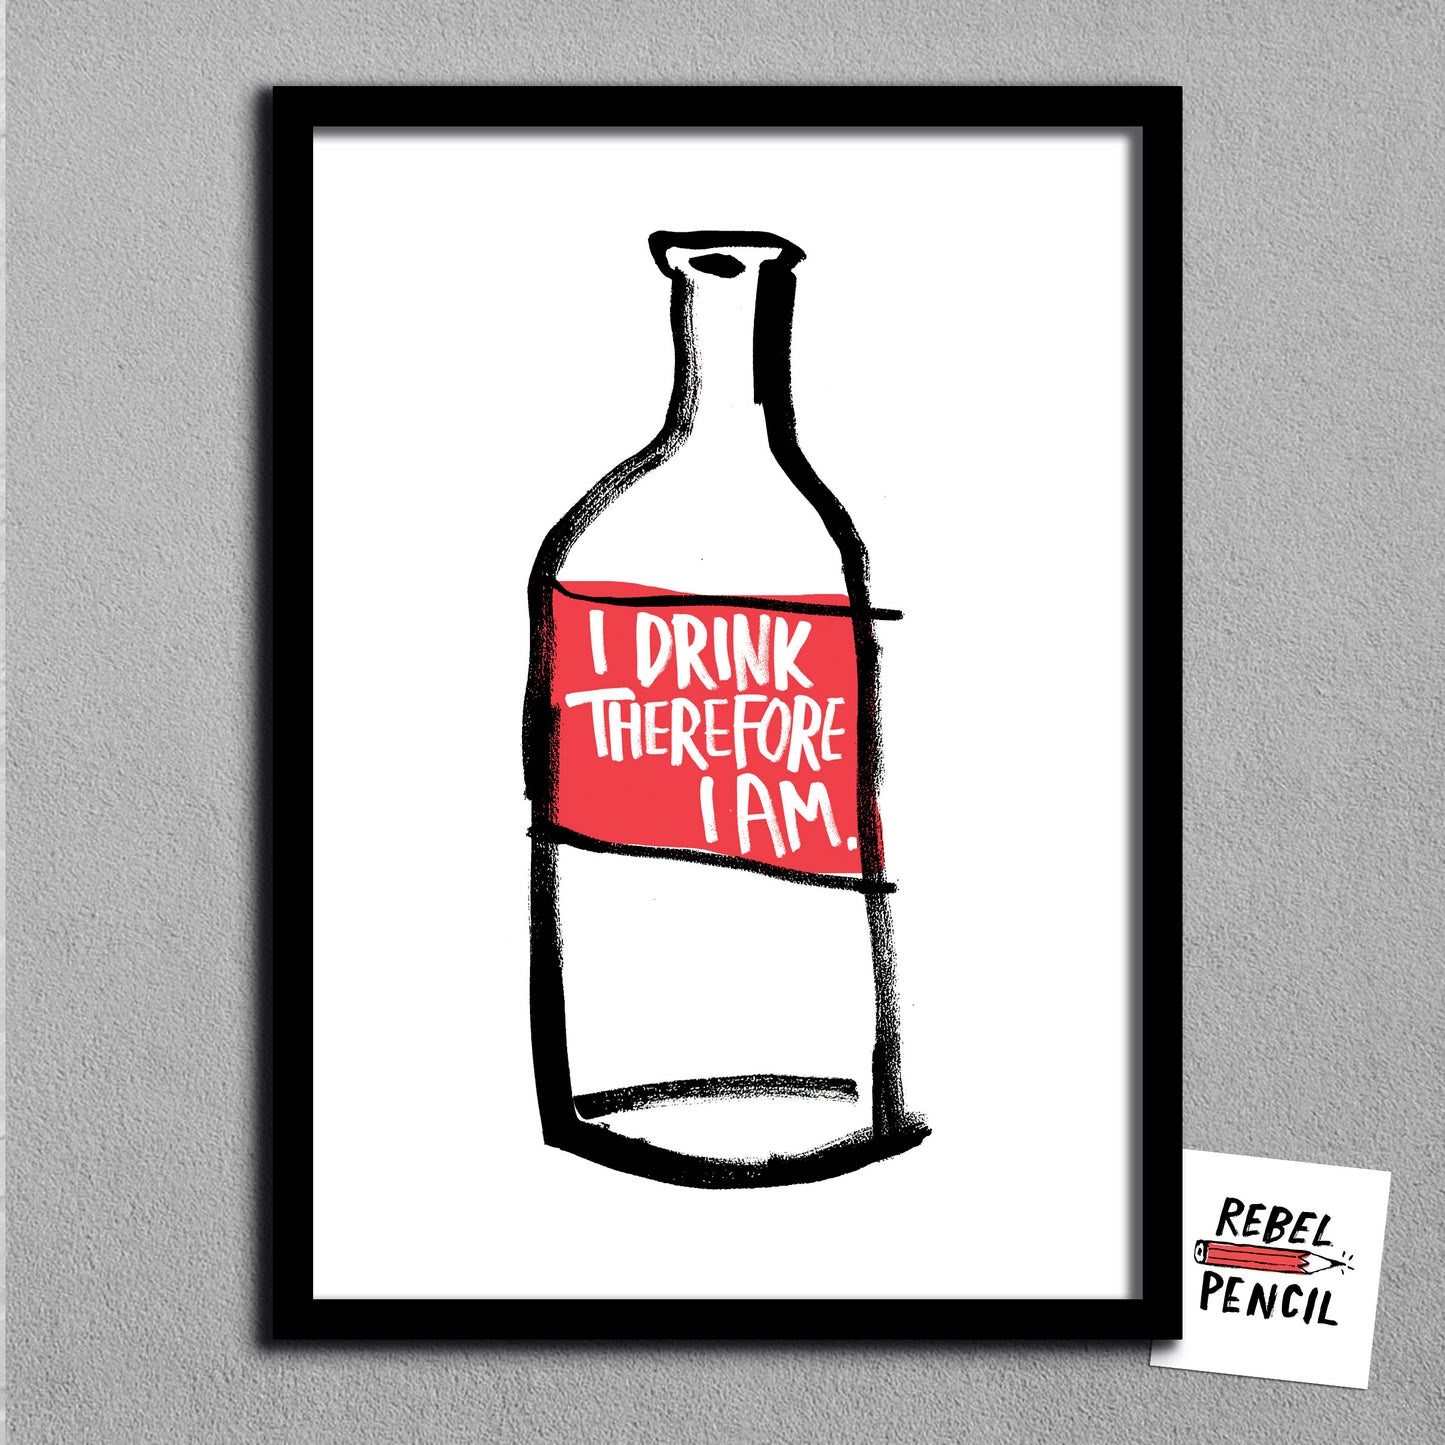 I Drink Therefore I Am print